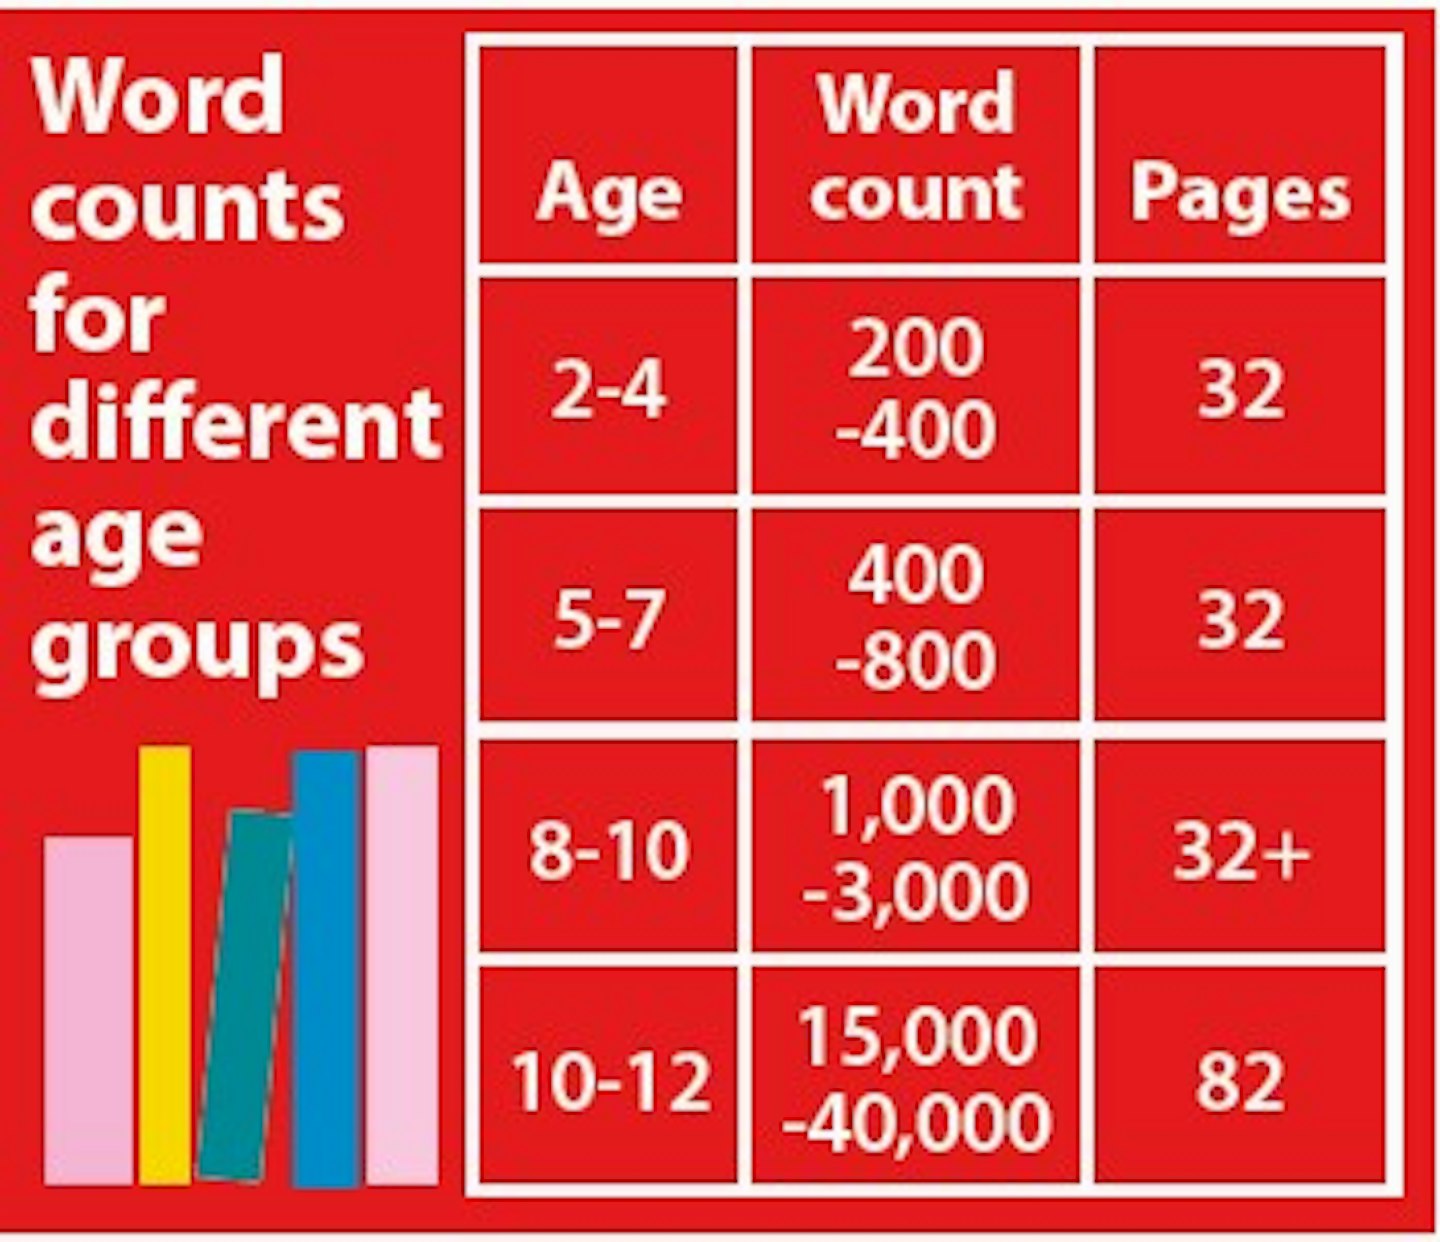 Word count for children's books